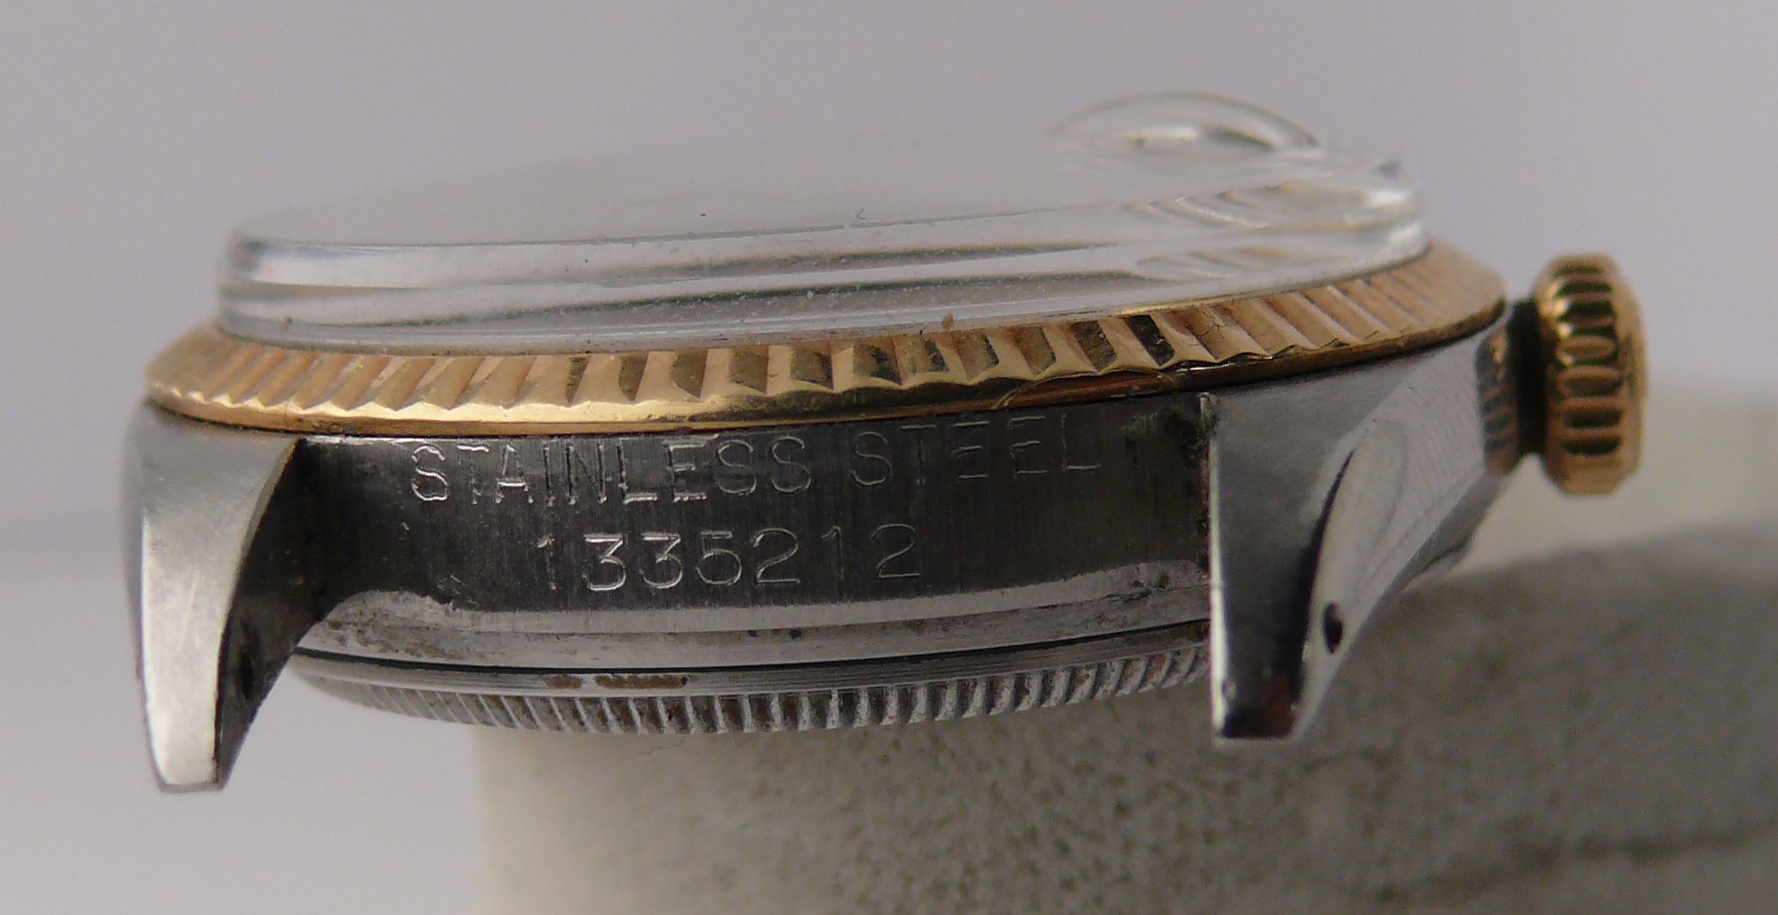 1966 Vintage Rolex Datejust 1601, all numbers are legible between lugs. Serial 1.3m dates this to - Image 16 of 16